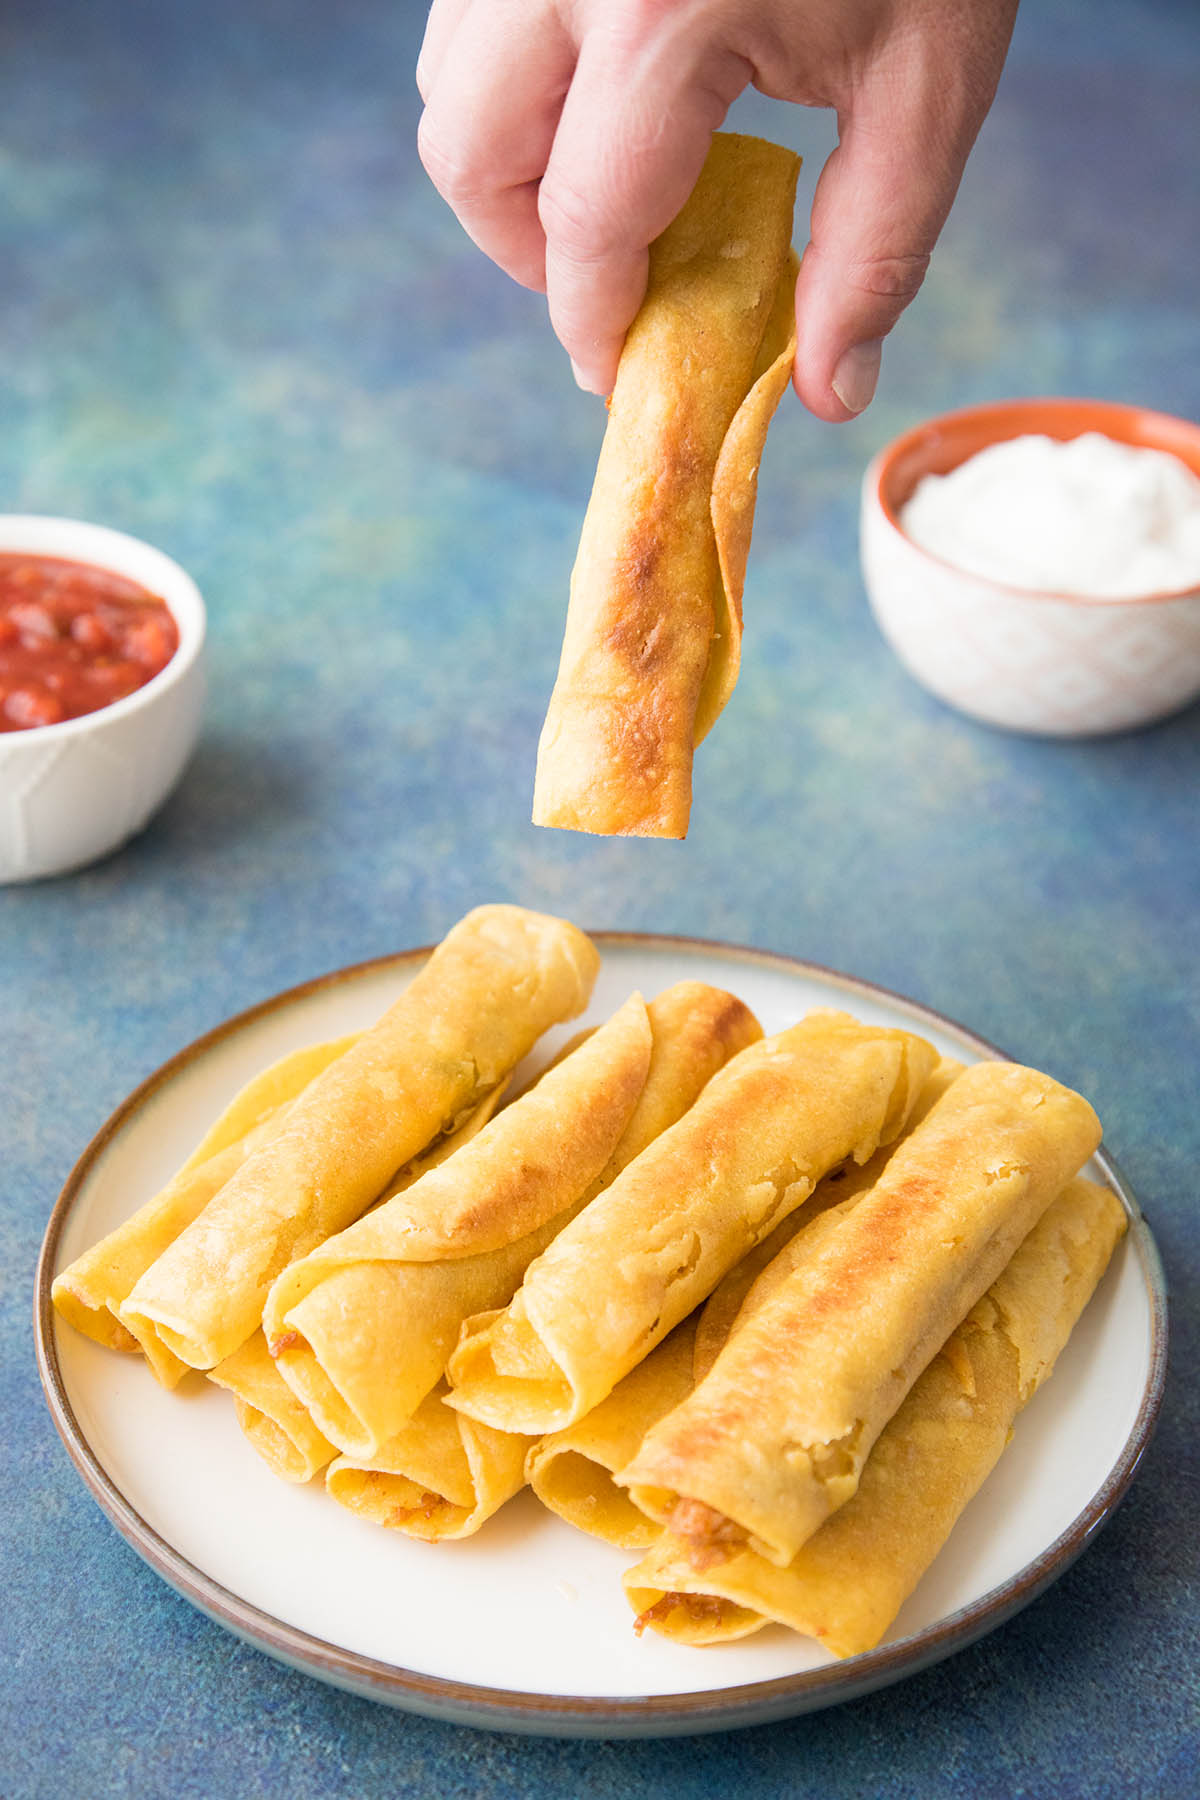 Chicken Taquitos - Grabbing one and ready to dip it in salsa to eat